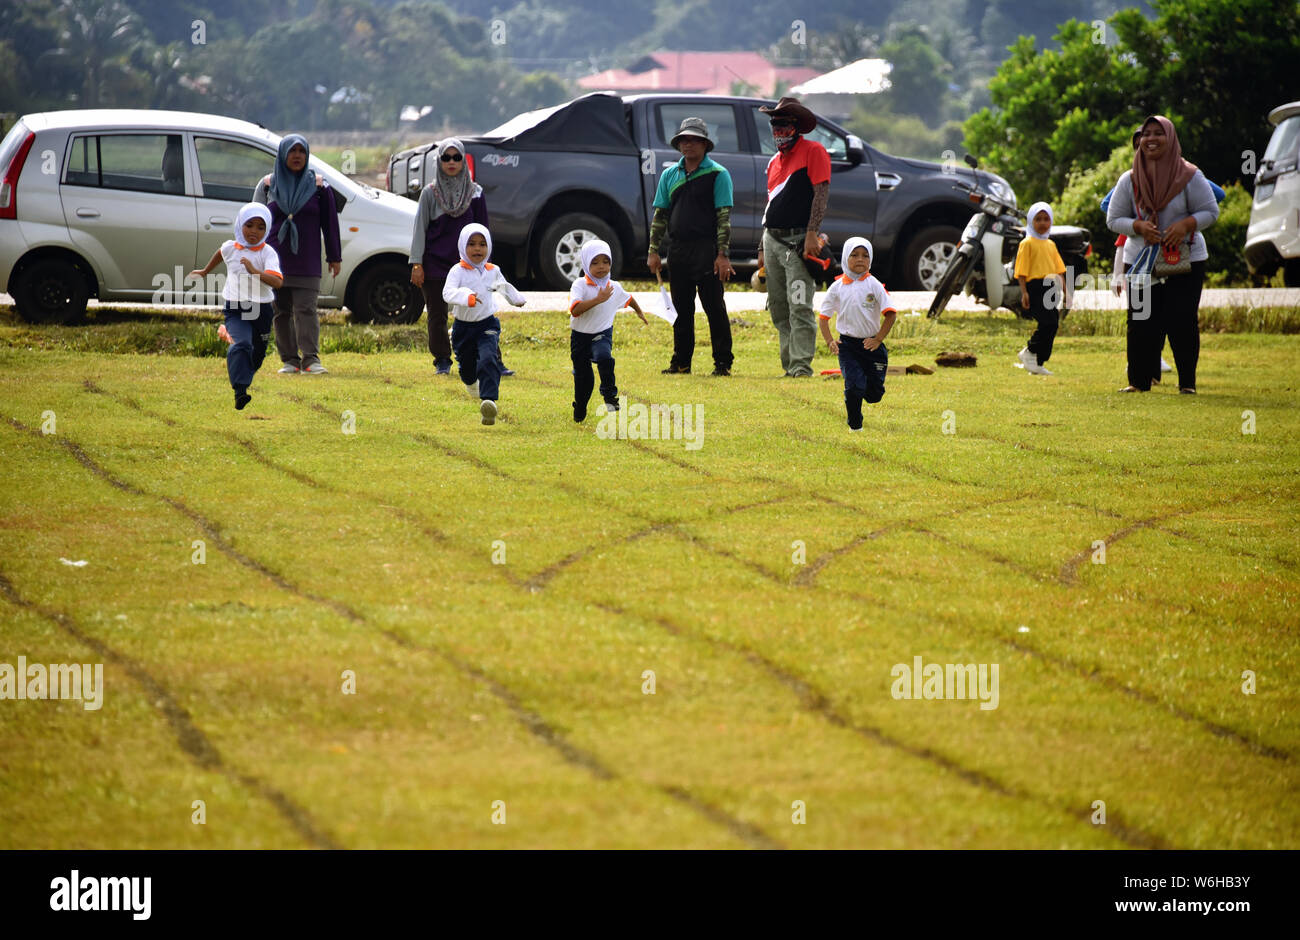 PEKAN, PAHANG - 17 February  2019 Annual elementary school sports days before school close for semester break. Stock Photo